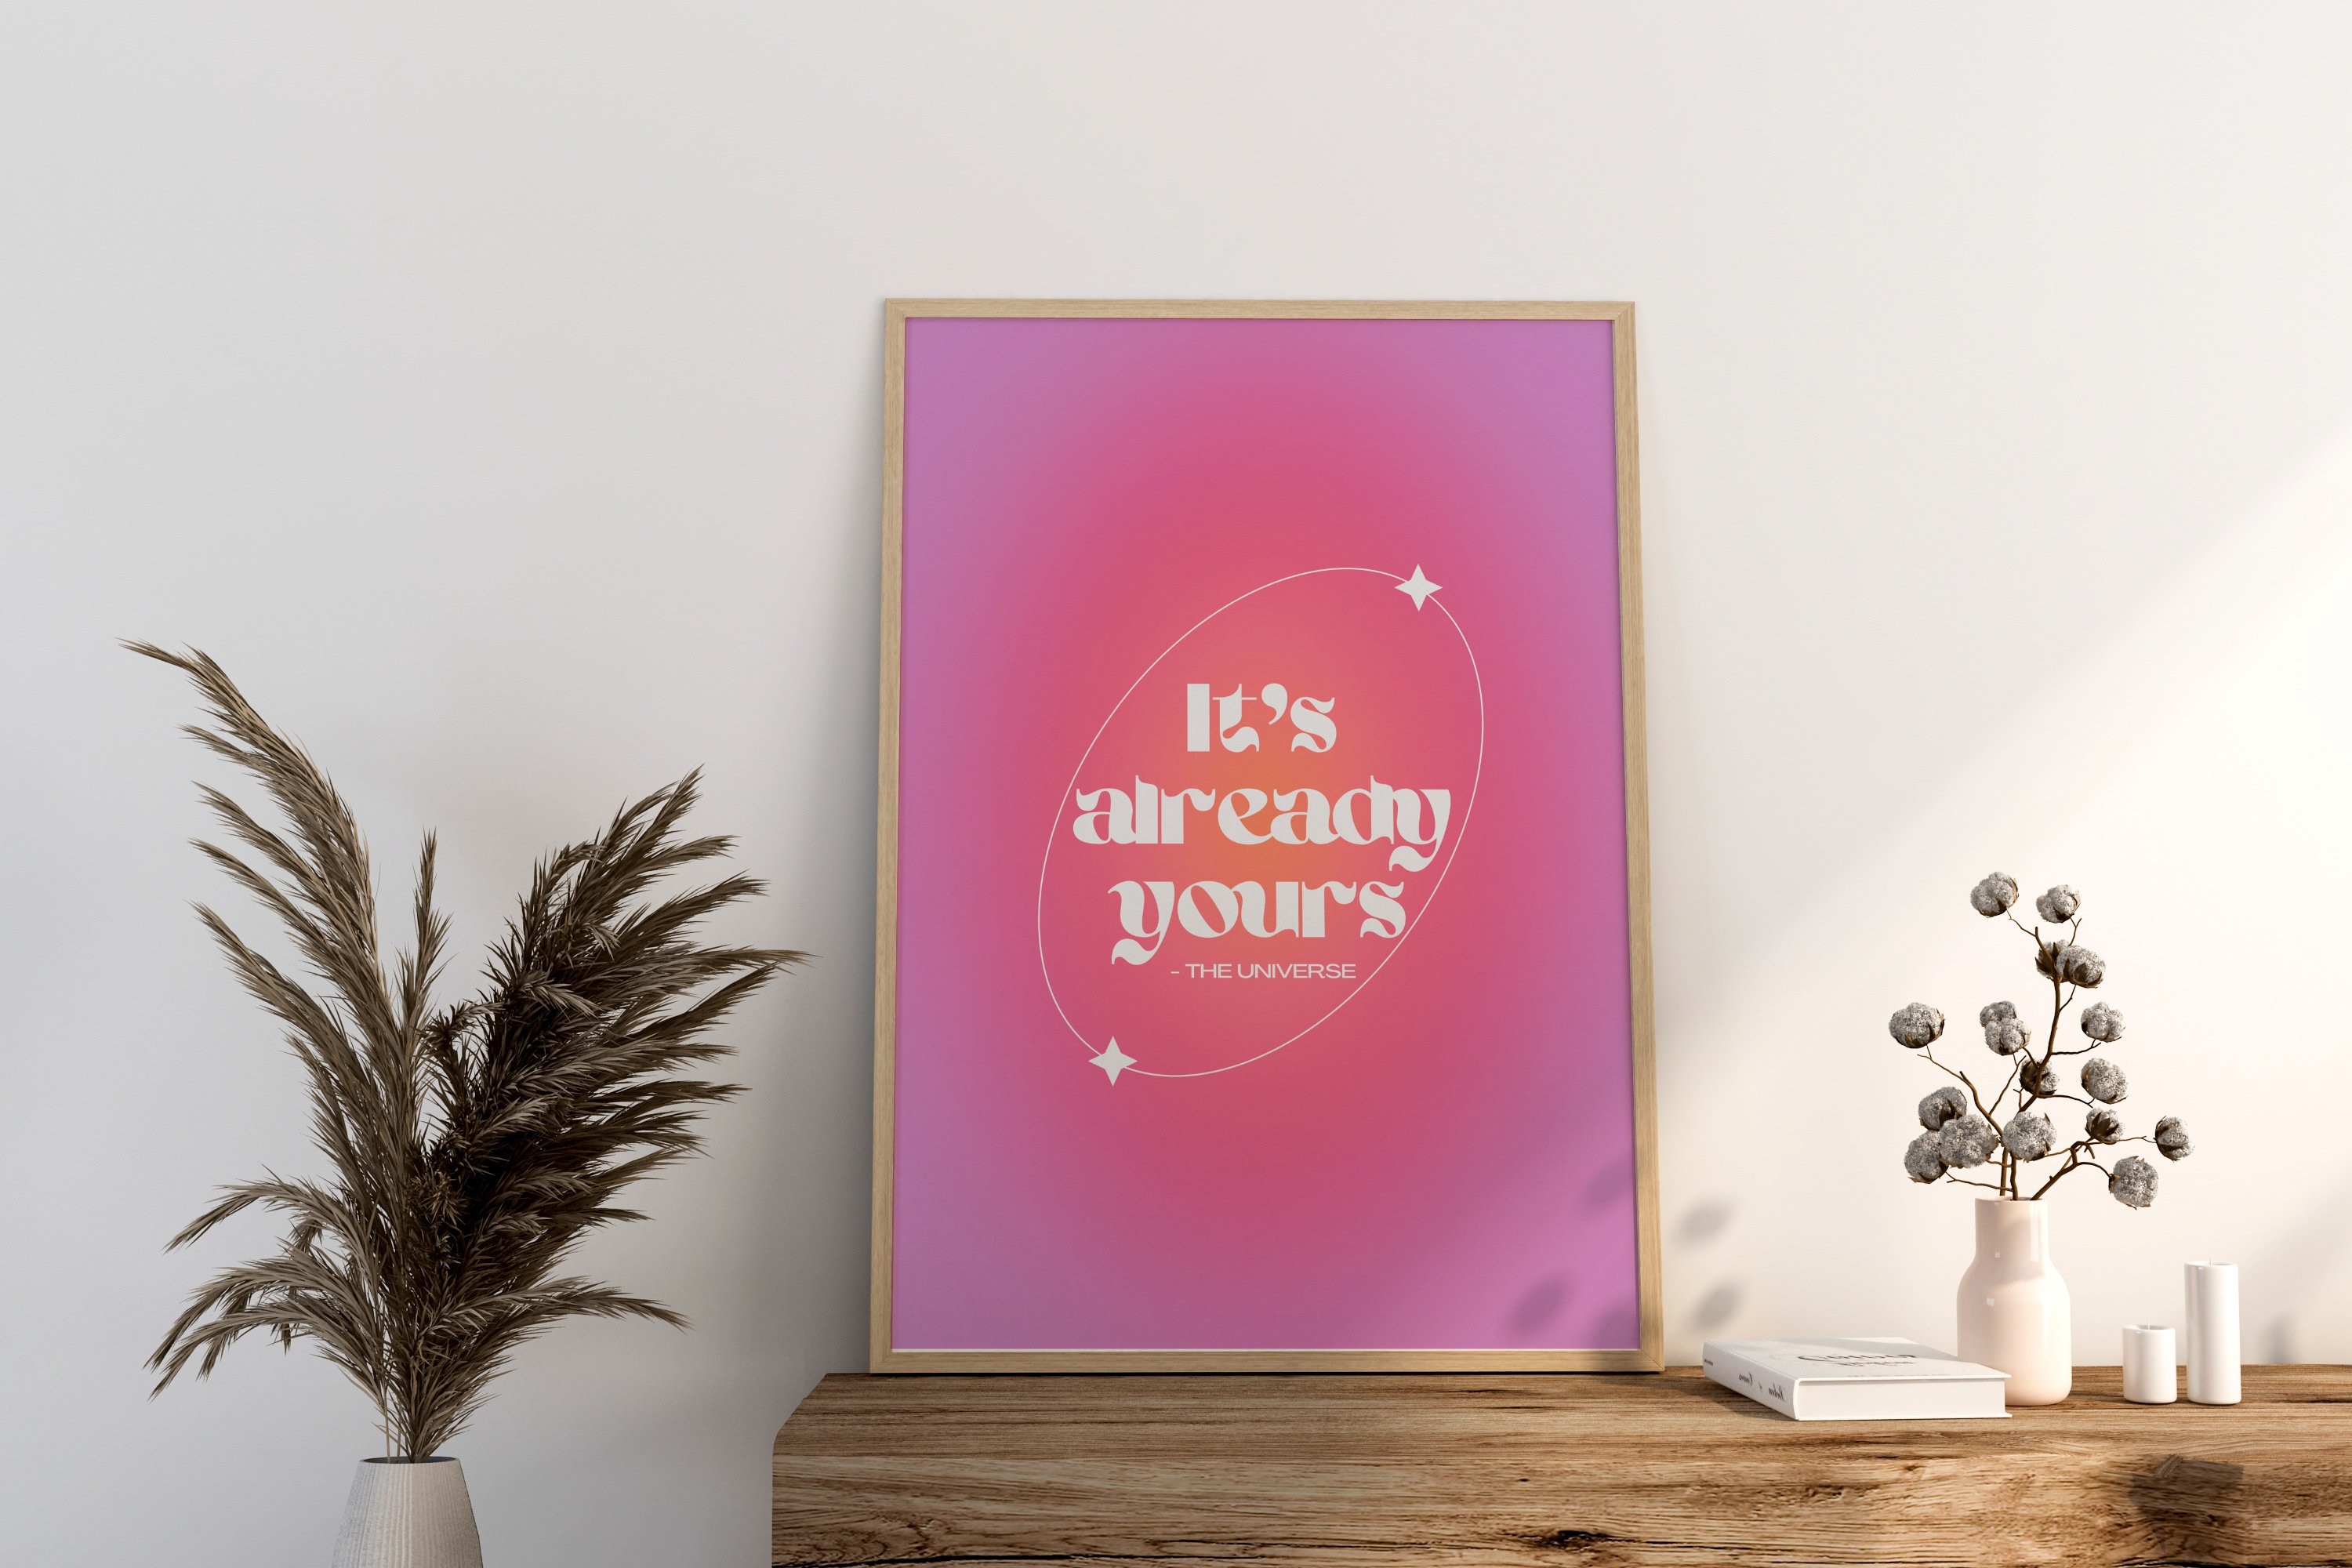 her vibe is pretty aesthetic retro that girl manifestation illustration  colorful aura Poster for Sale by Anavrisss